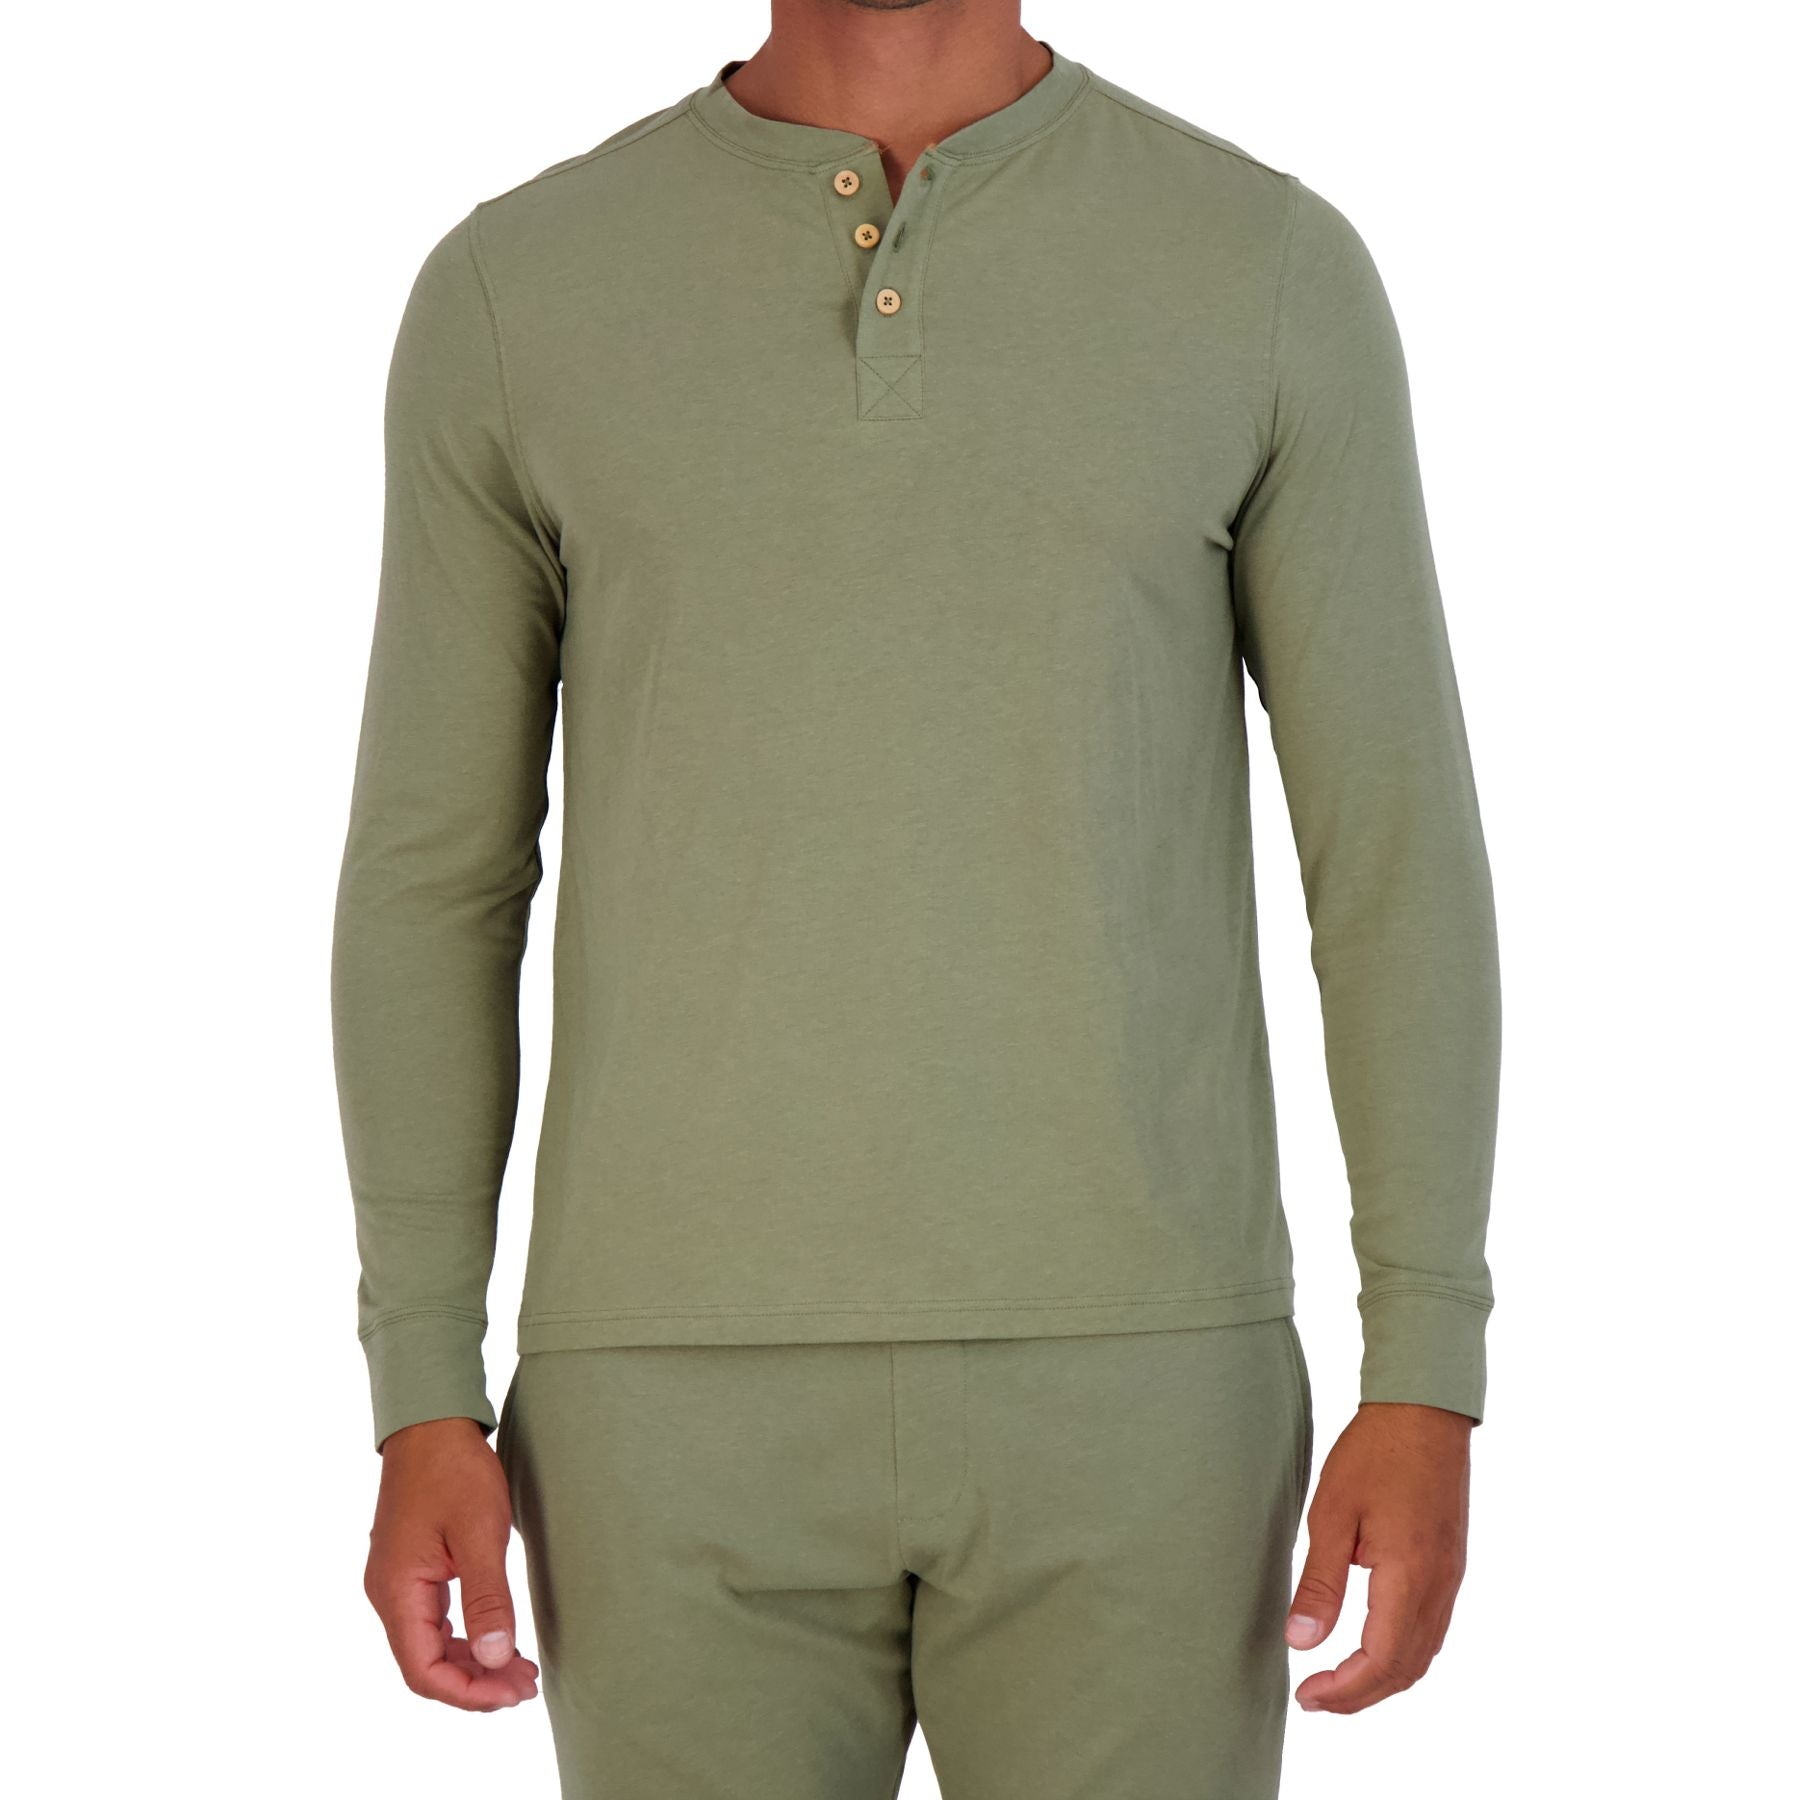 Henley Lounge Shirt in Olive by Wood Underwear